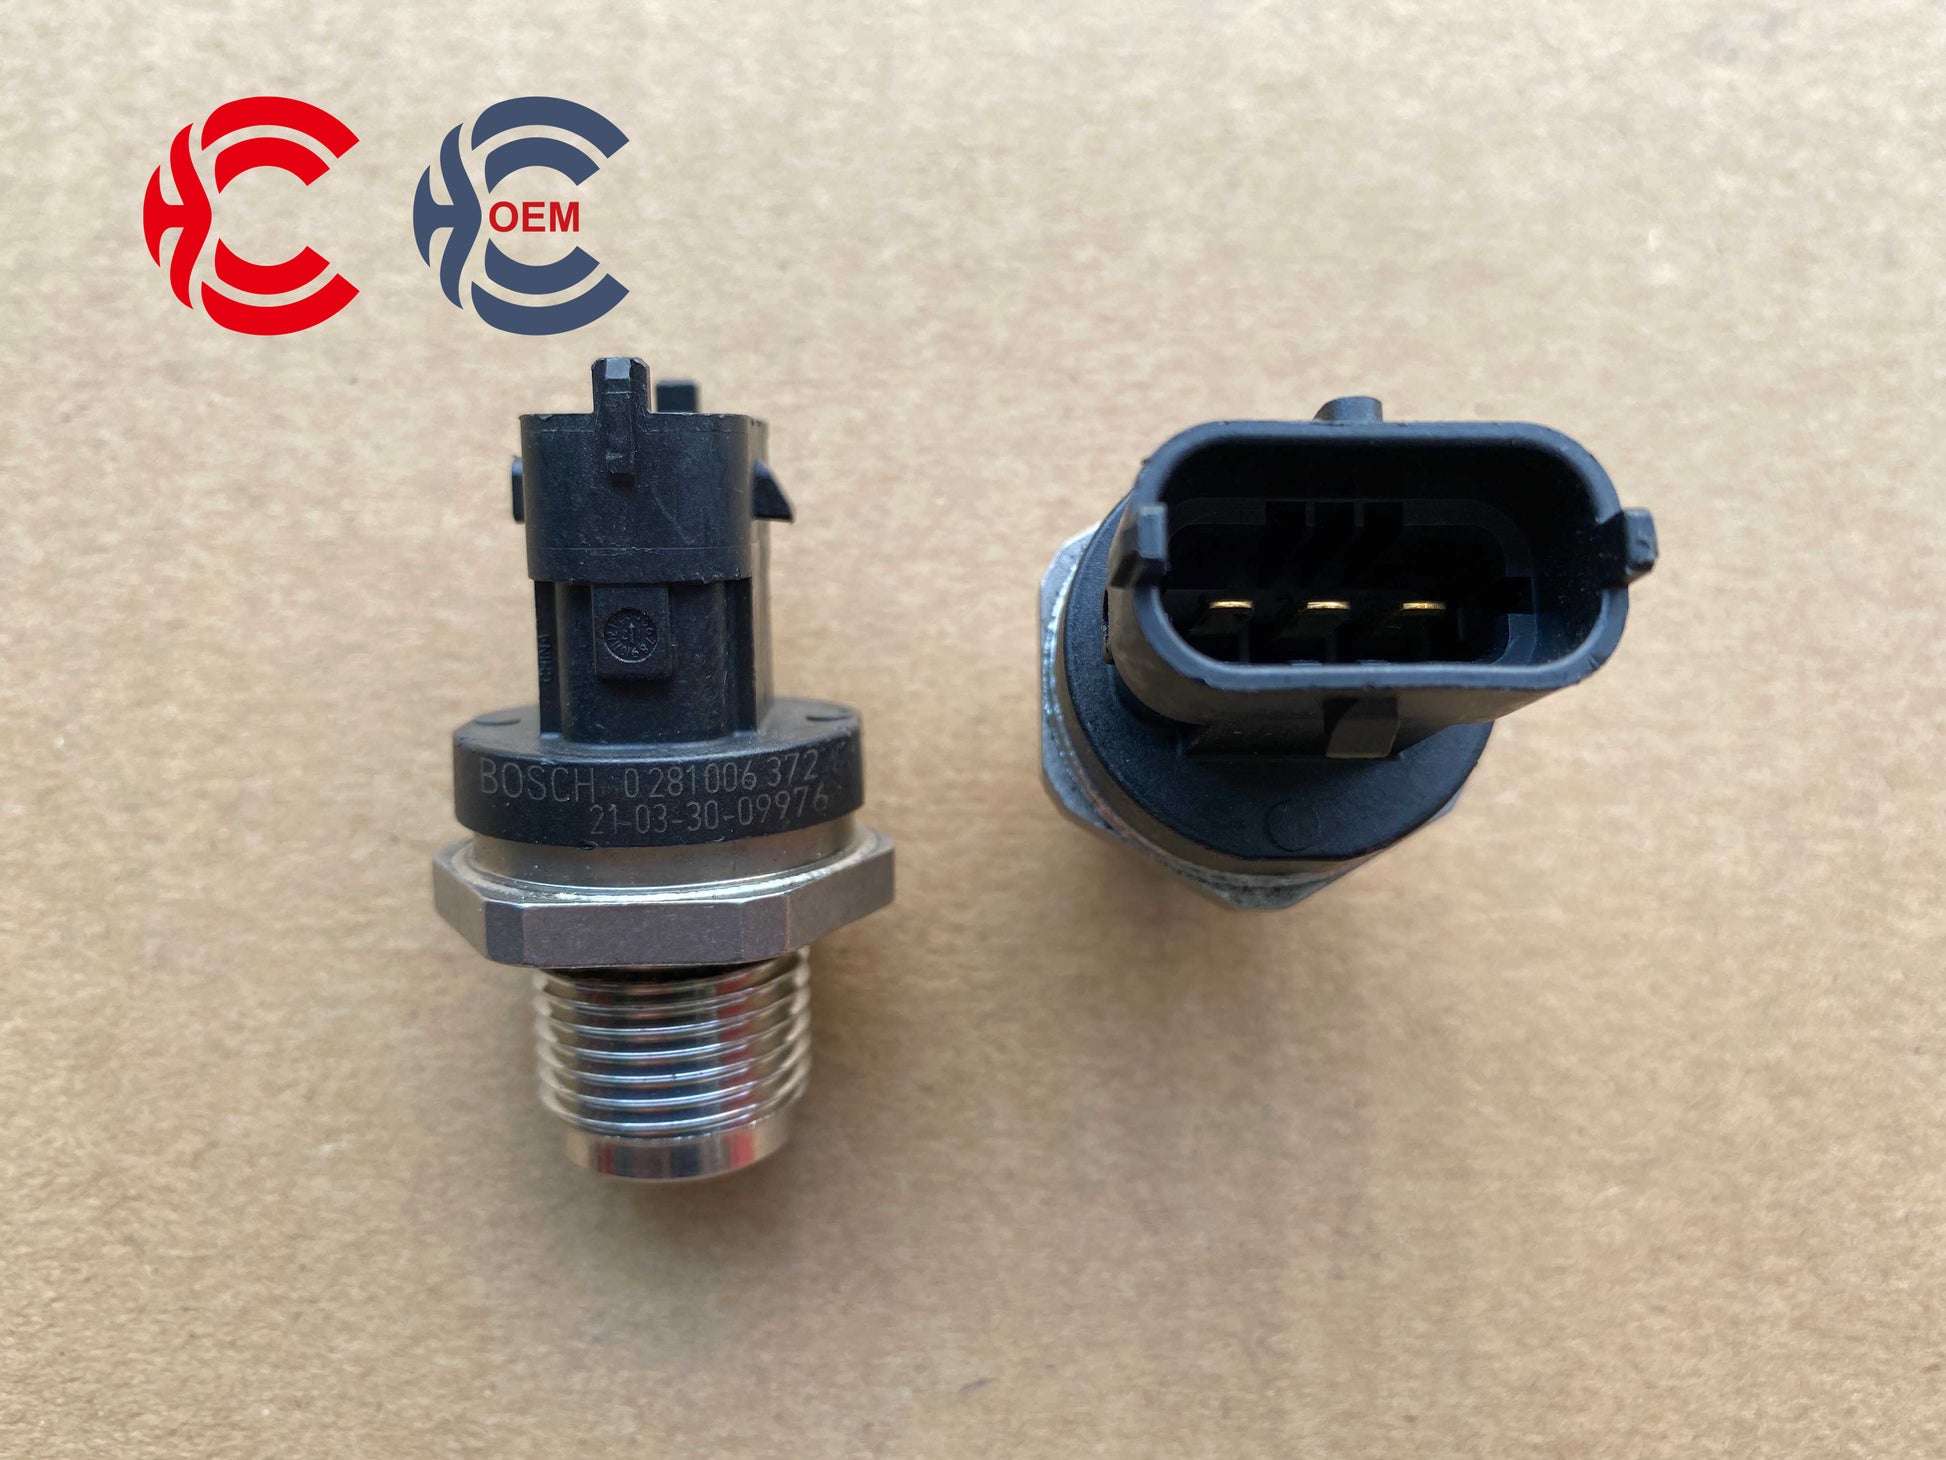 OEM: 0281002372Material: ABS metalColor: black silverOrigin: Made in ChinaWeight: 100gPacking List: 1* Fuel Pressure Sensor More ServiceWe can provide OEM Manufacturing serviceWe can Be your one-step solution for Auto PartsWe can provide technical scheme for you Feel Free to Contact Us, We will get back to you as soon as possible.